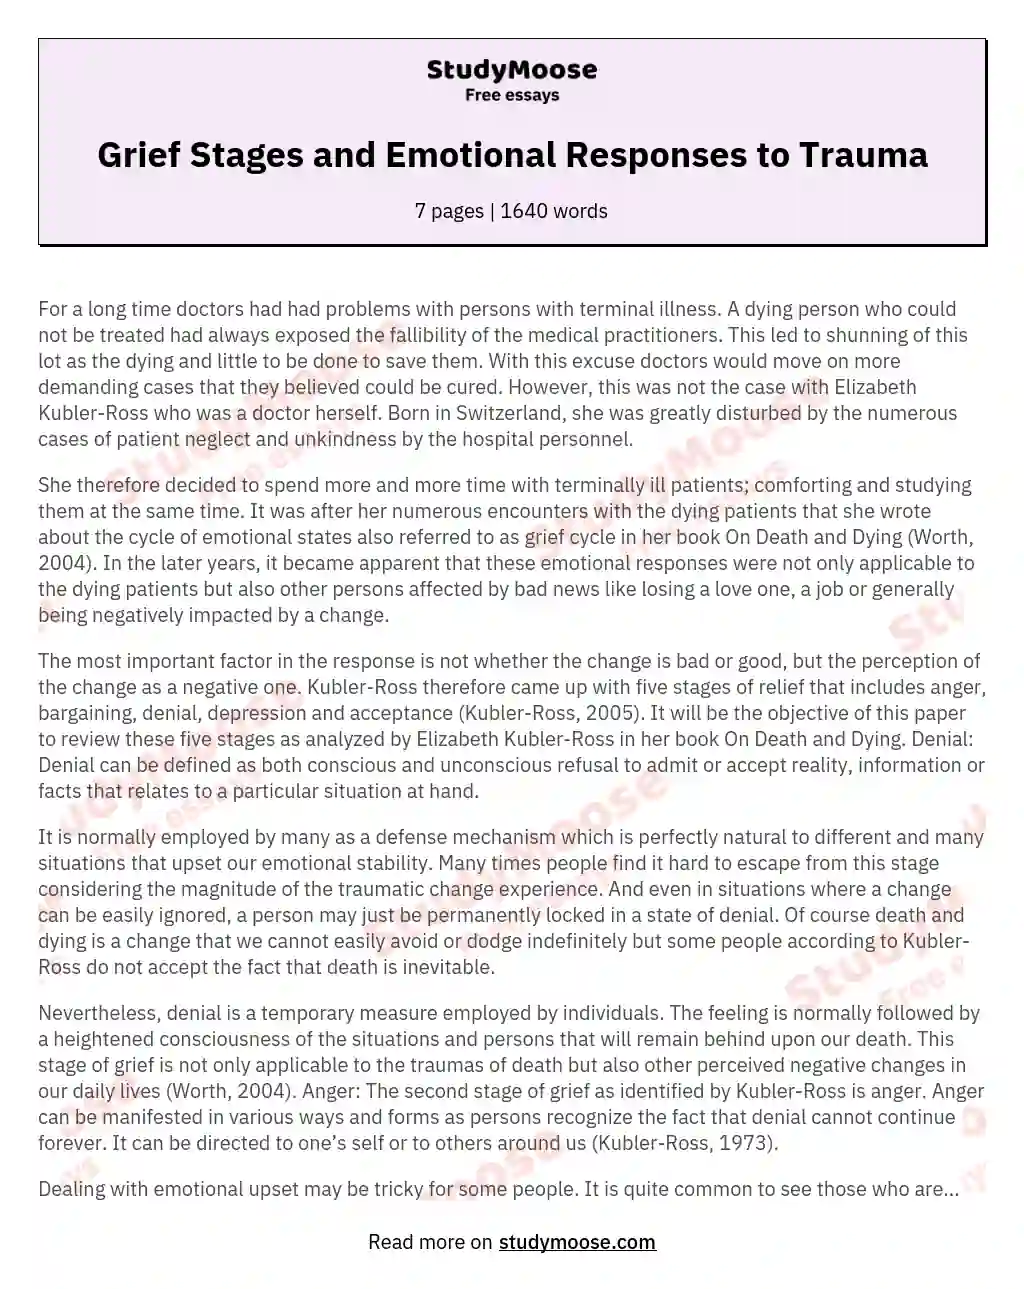 Grief Stages and Emotional Responses to Trauma essay